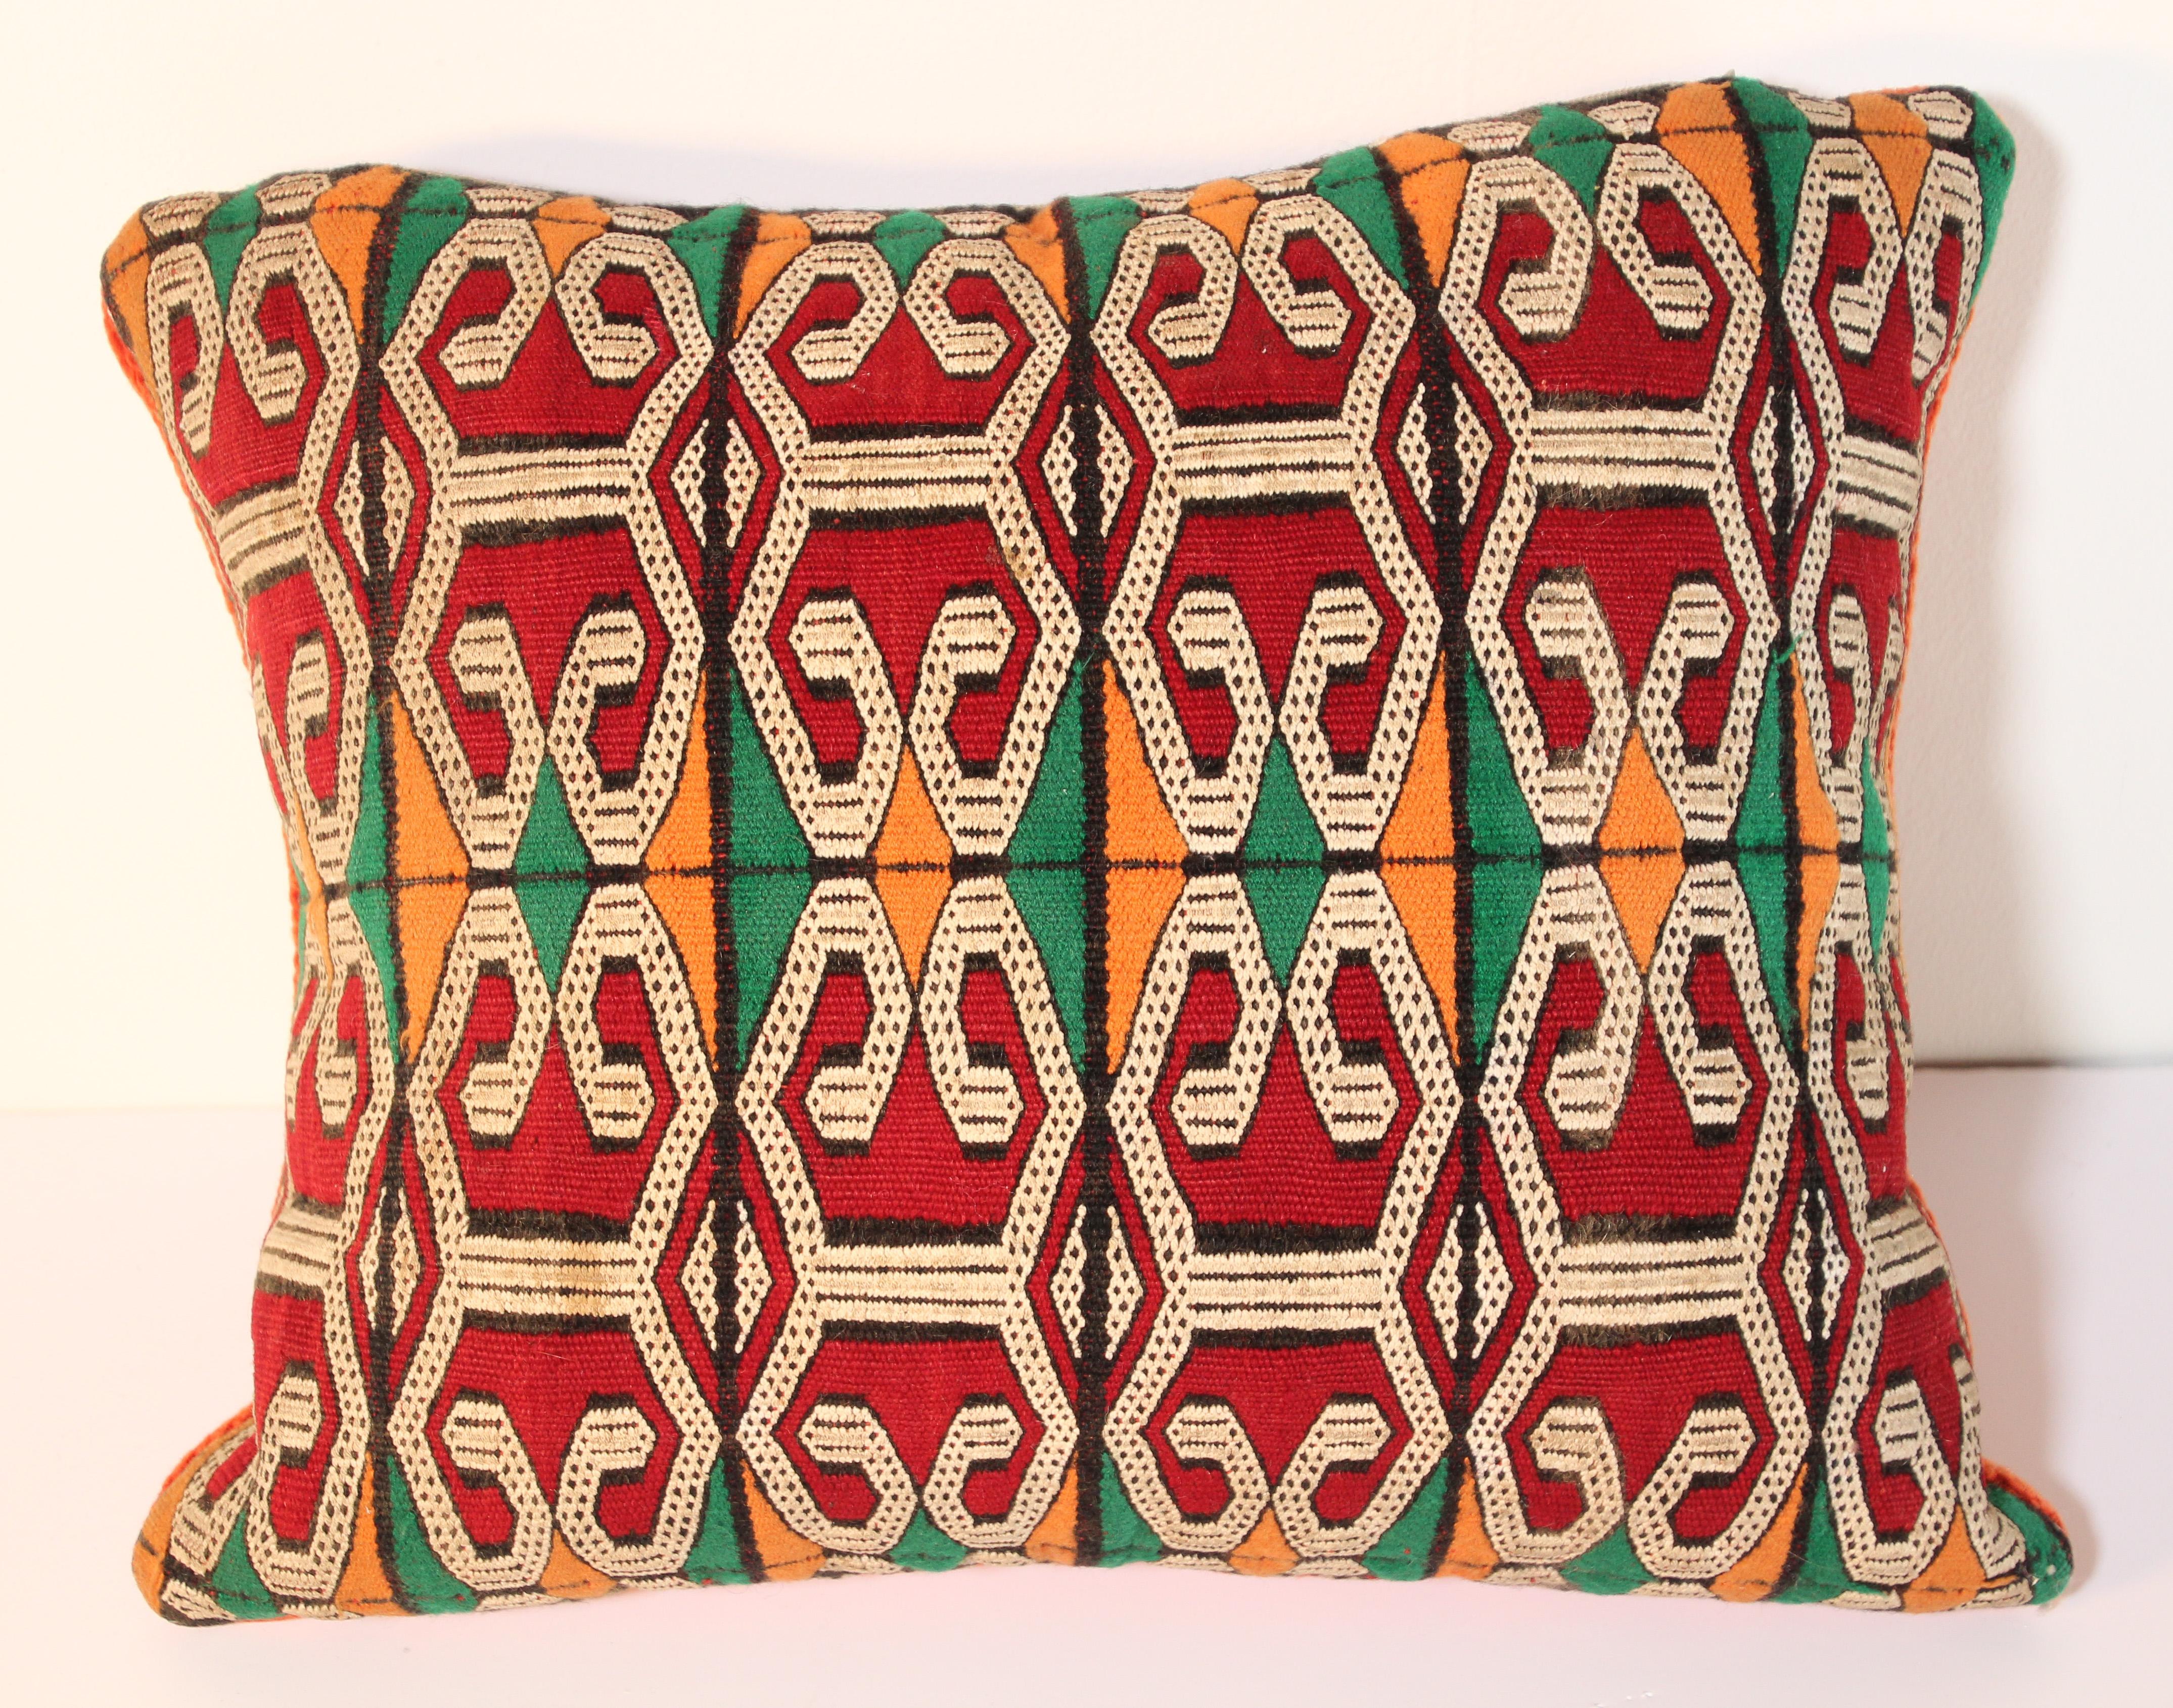 Moroccan Berber handwoven tribal throw pillow made from a vintage rug.
The front and the back are made from a different rug, front is more elaborate and back is more plain.
Geometric African tribal designs in red, white and black and some green